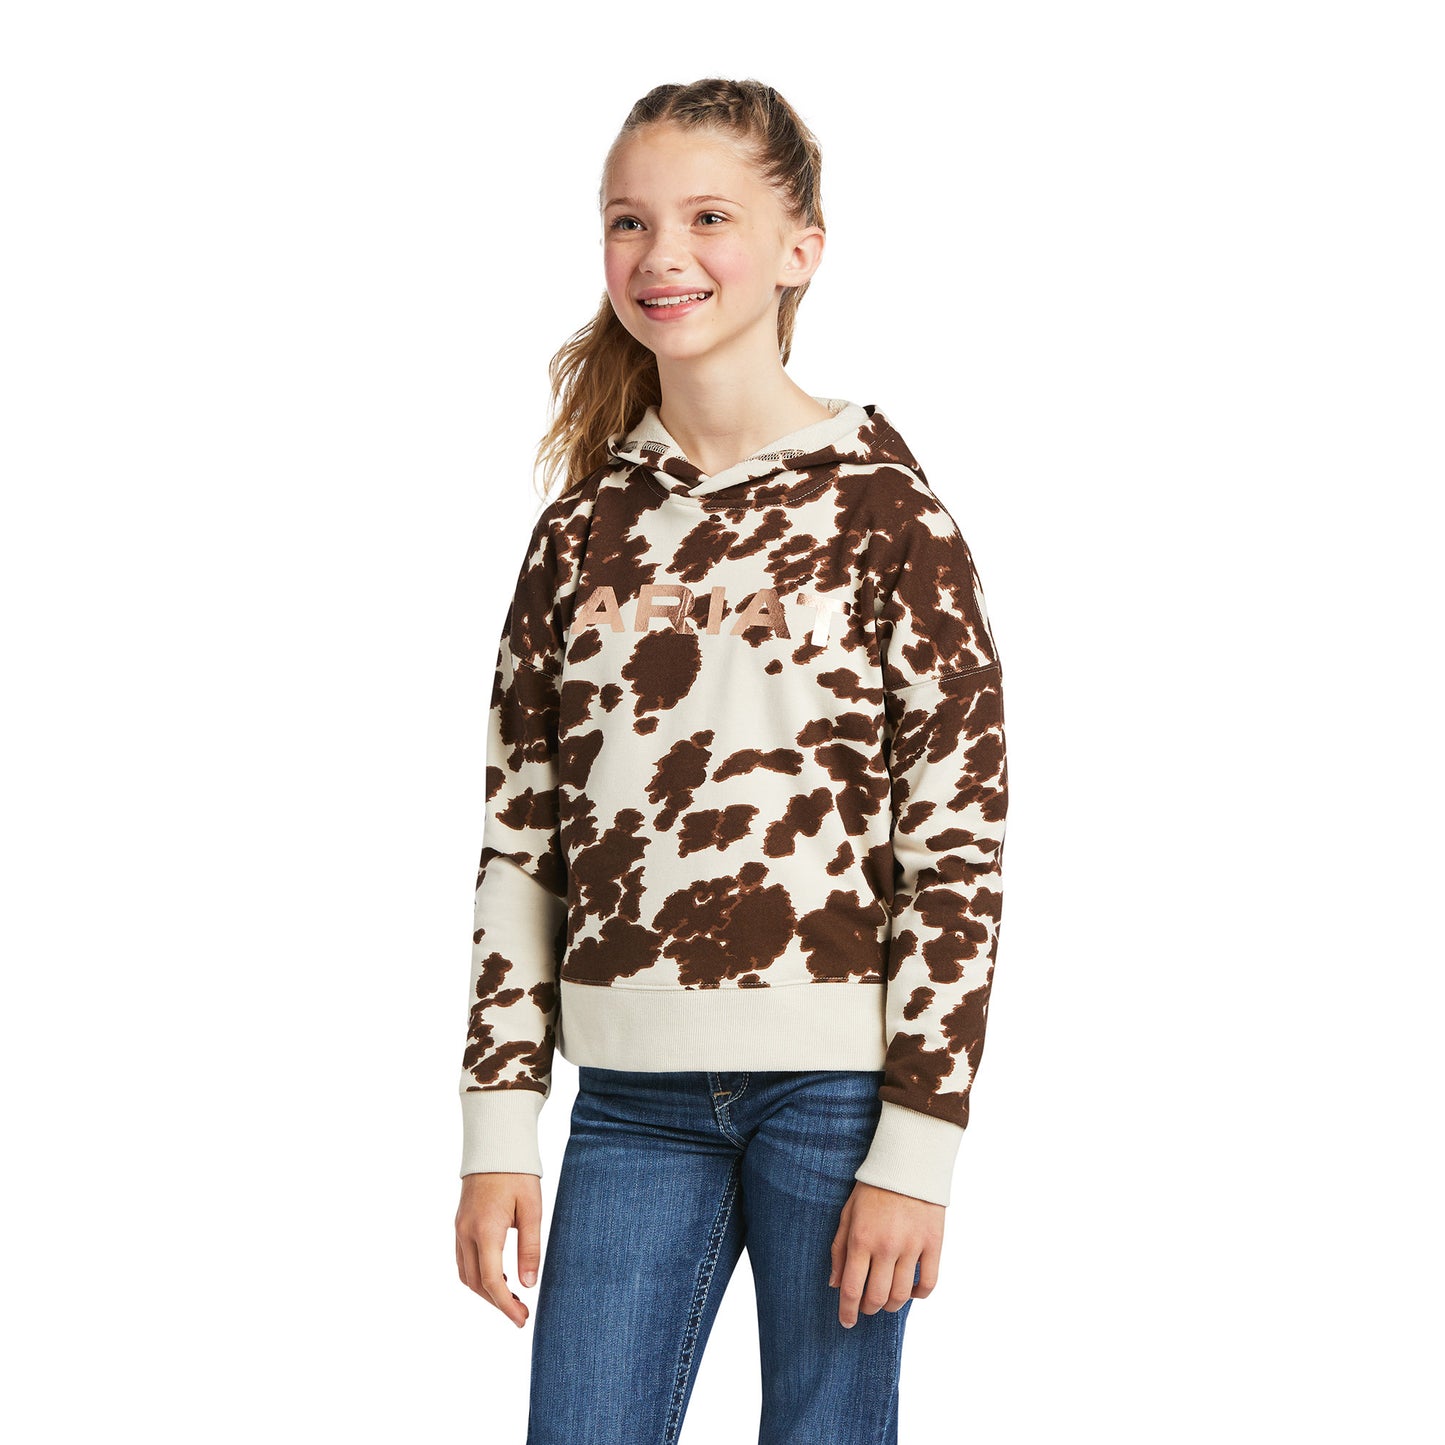 Ariat® Children's R.E.A.L.™ Pony Mustang Hoodie 10039523